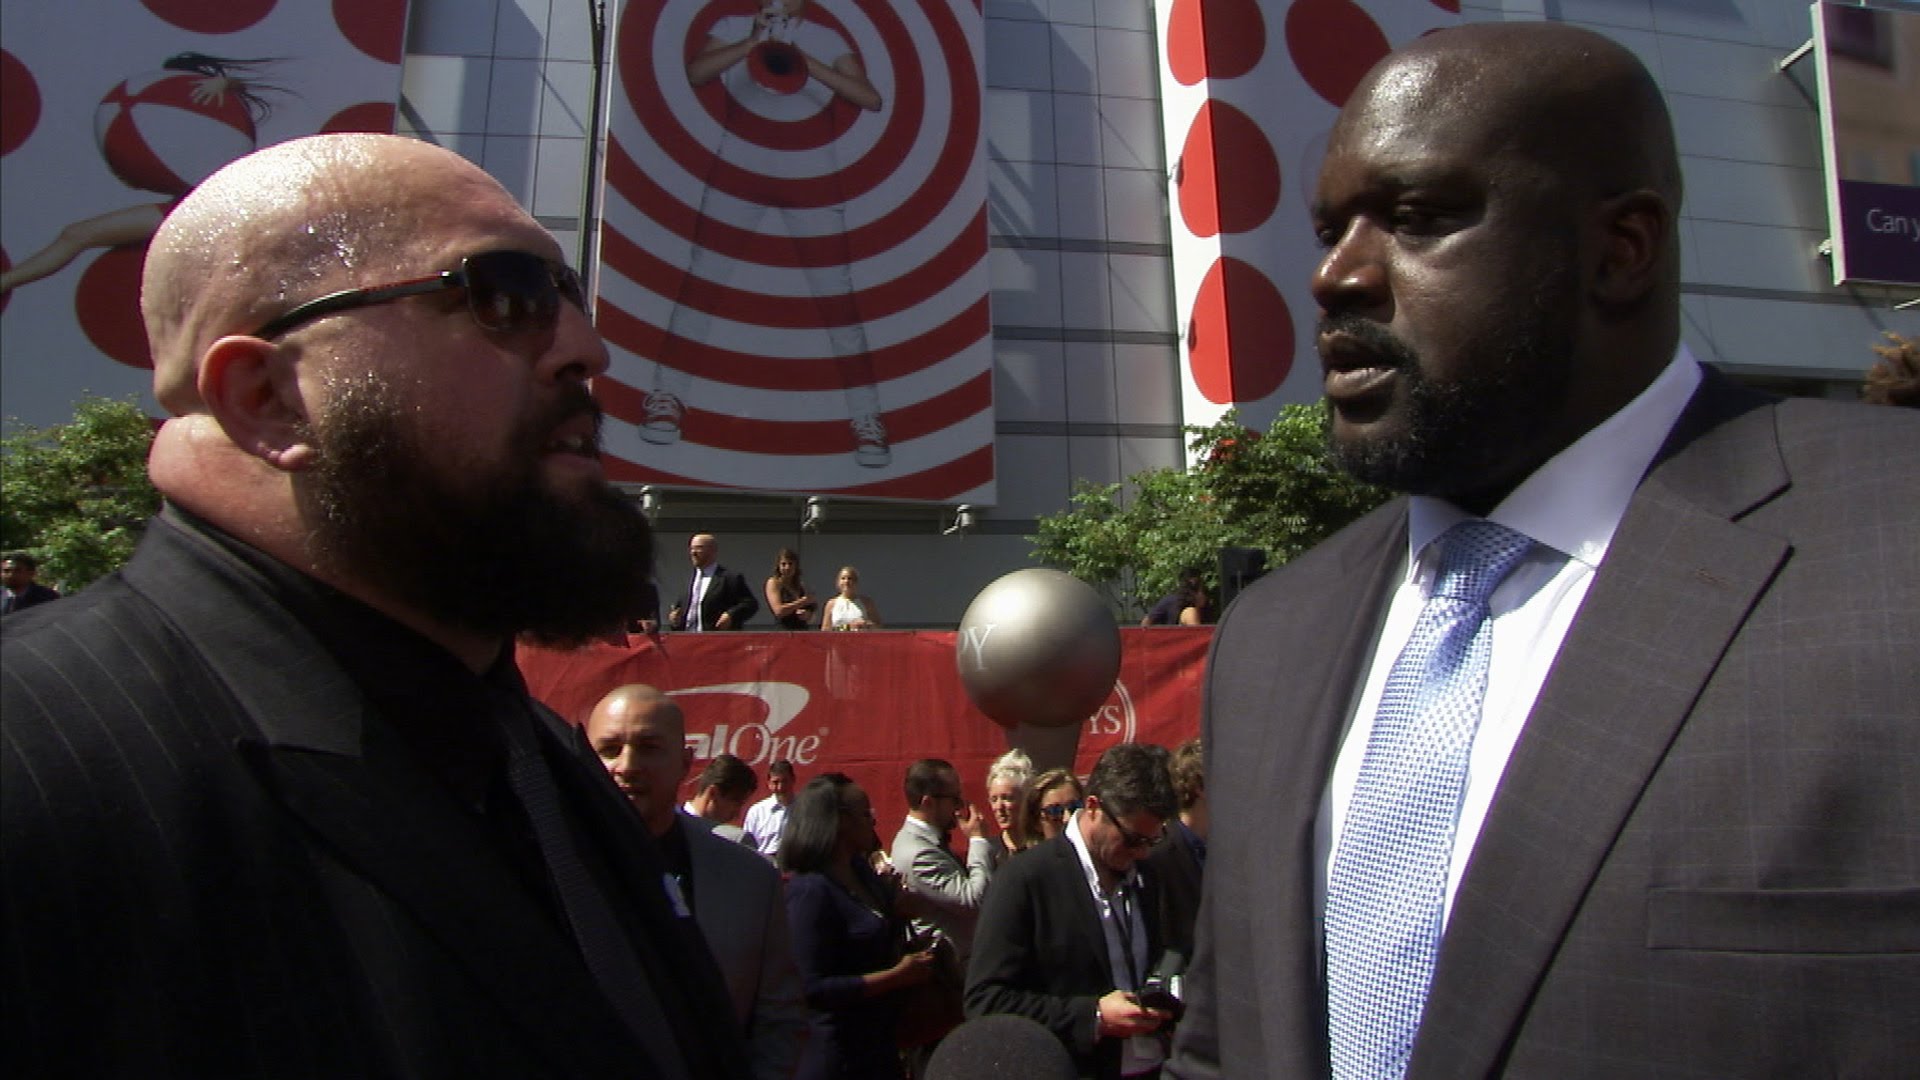 Big Show challenges Shaq to a match at WrestleMania